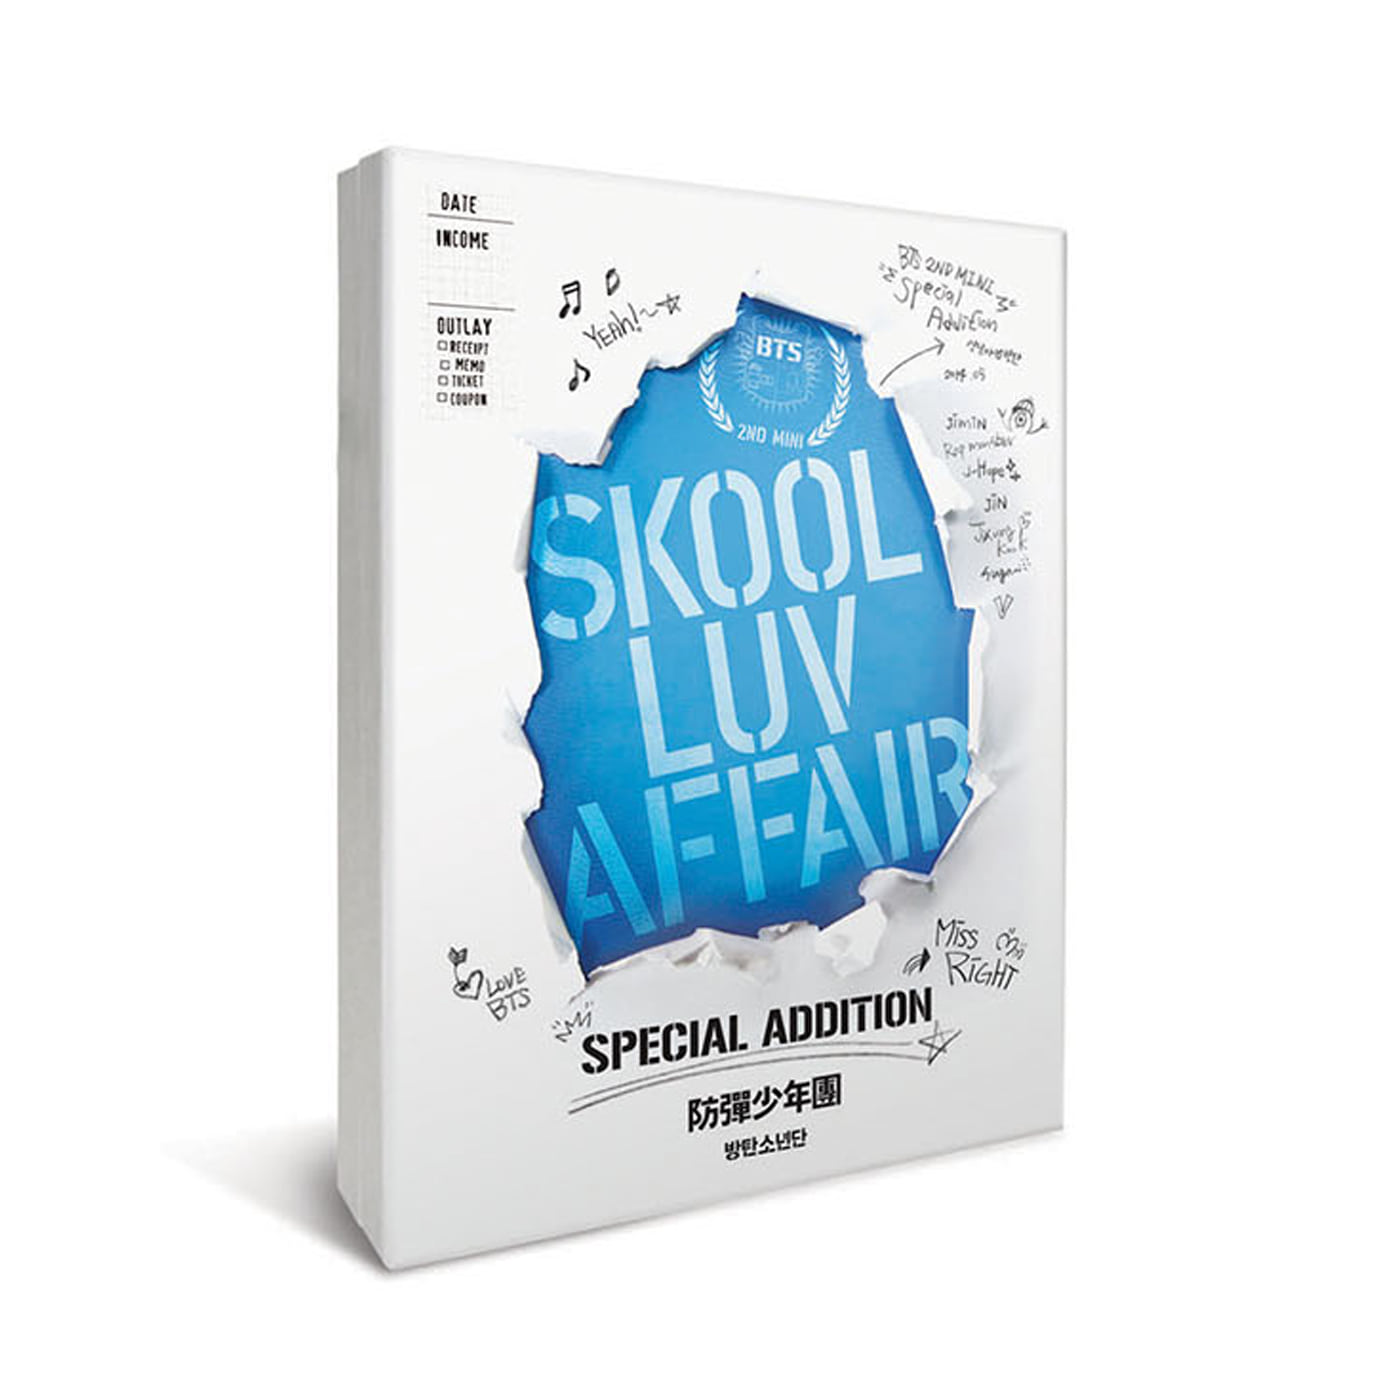 BTS - SKOOL LUV AFFAIR SPECIAL ADDITION 2020 (RE-RELEASE)케이팝스토어(kpop store)